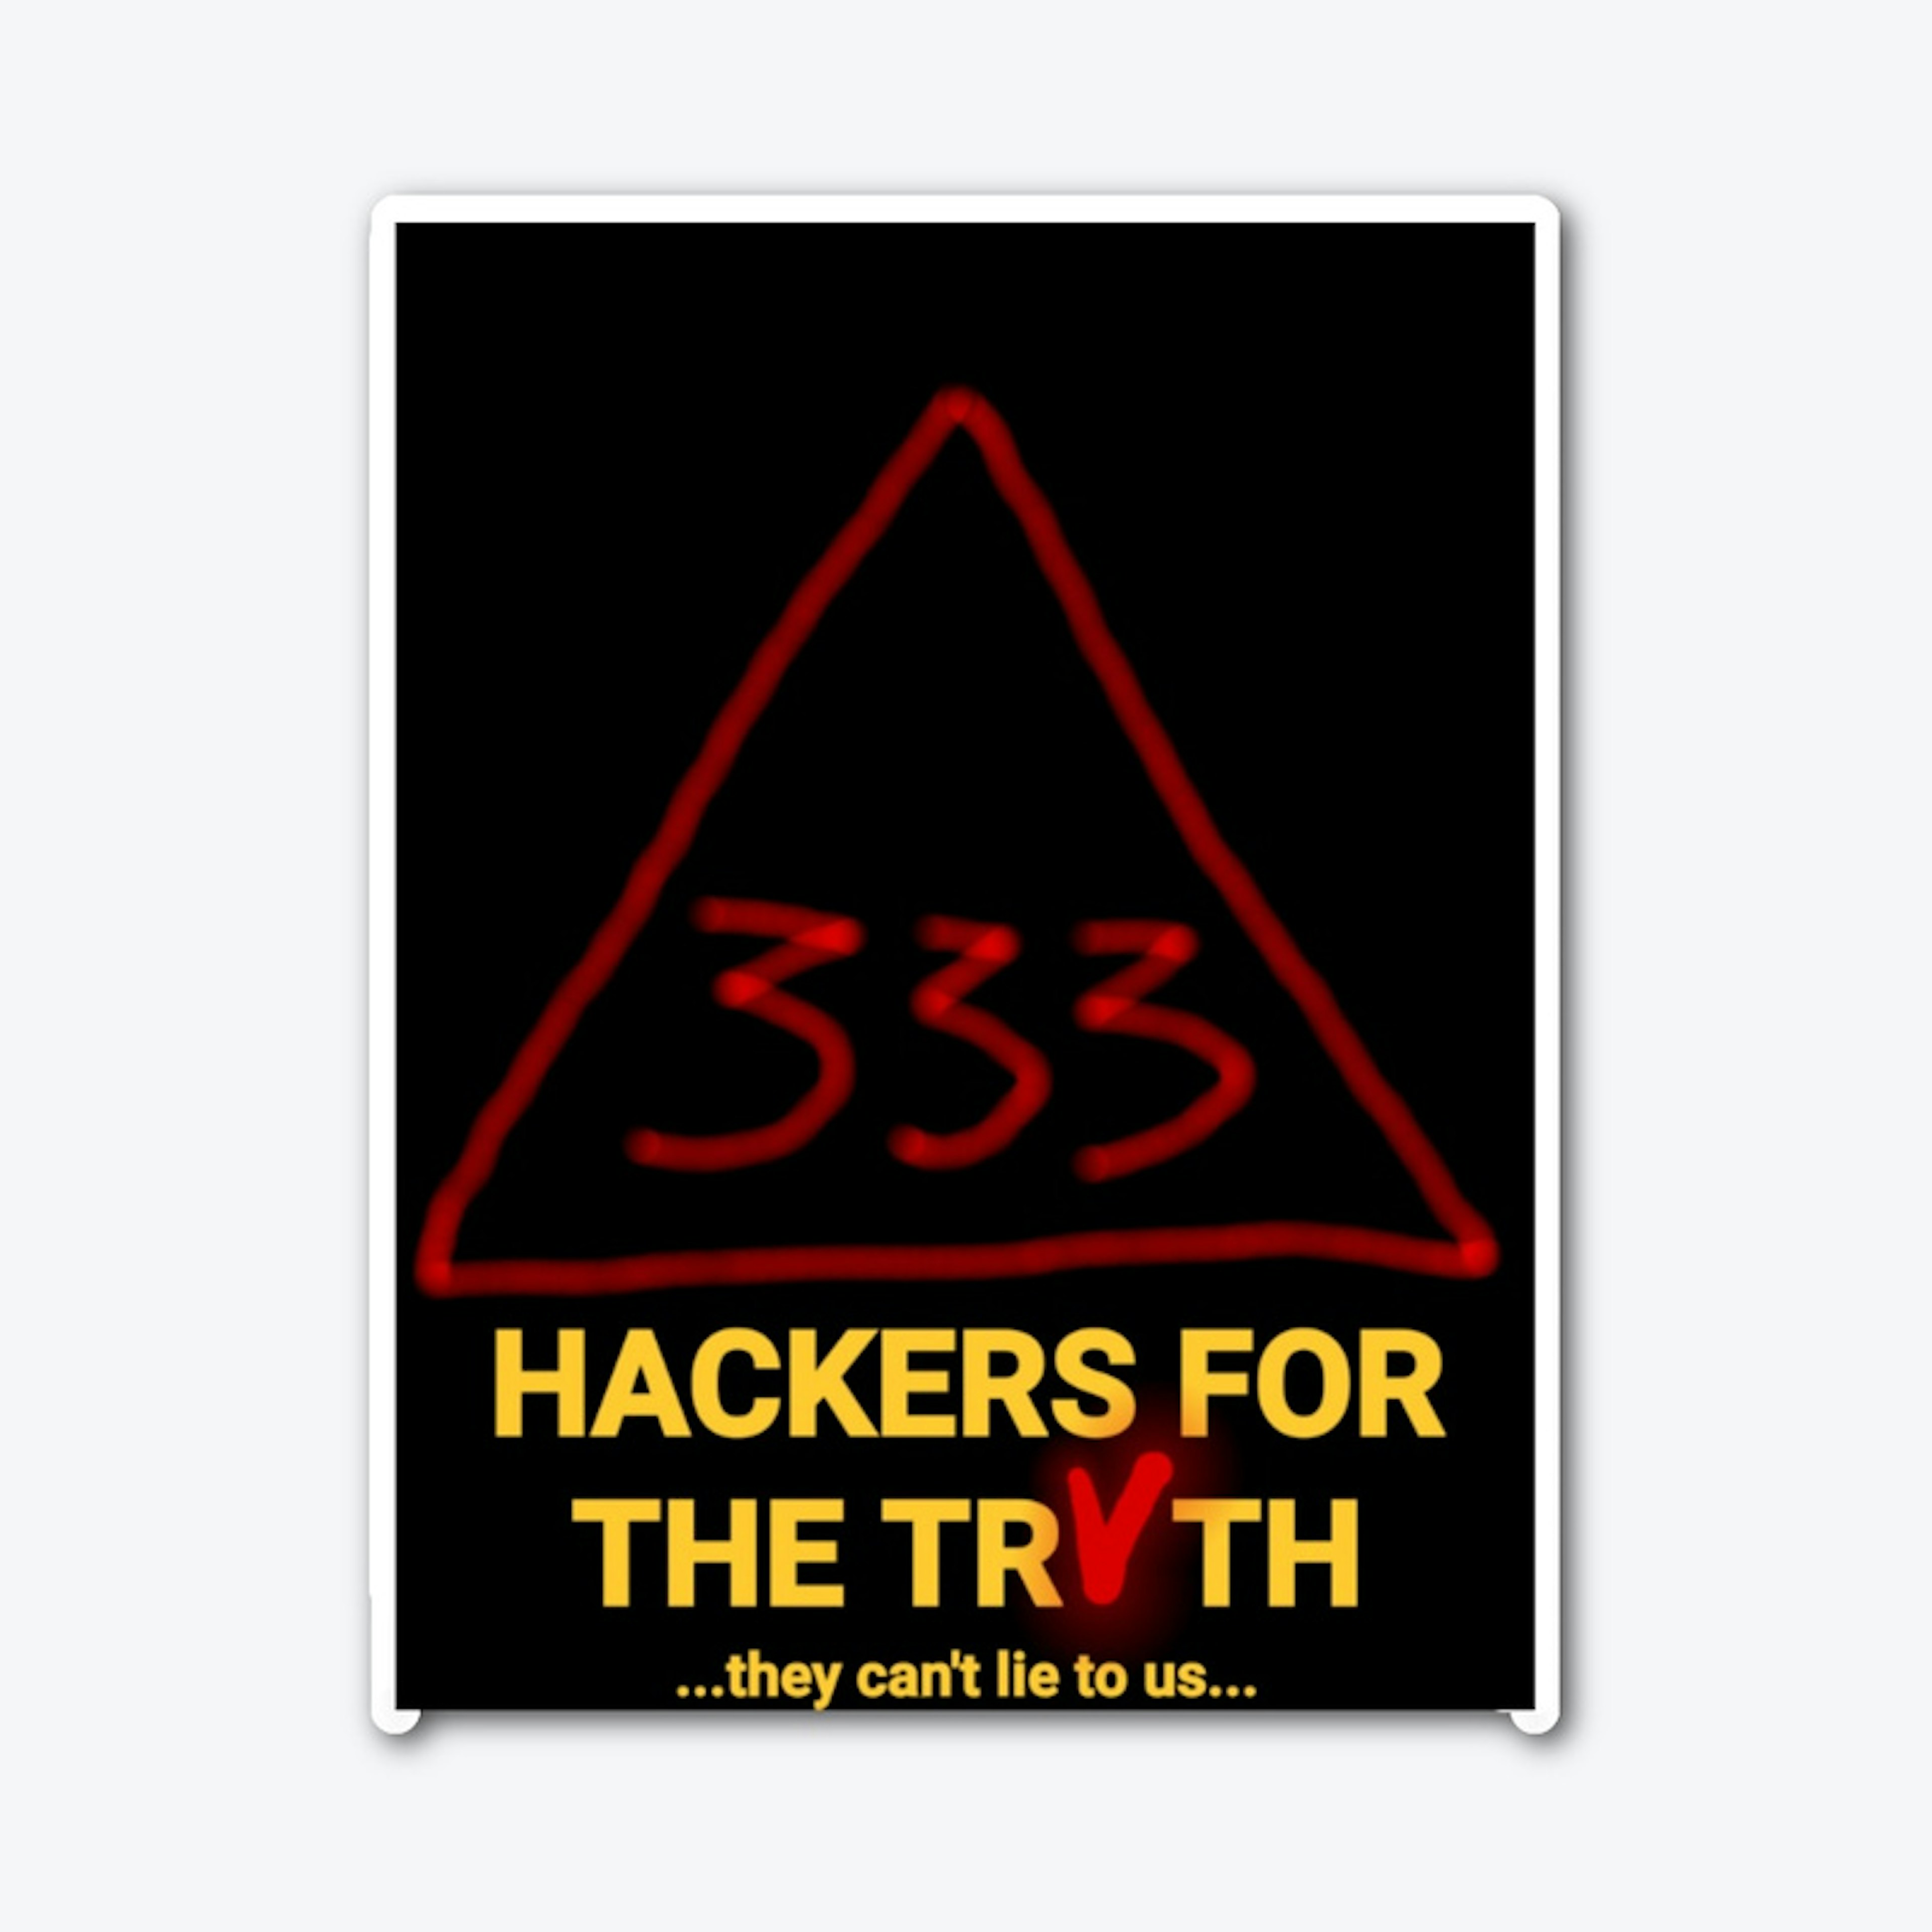 H4ck3r5 for the Truth